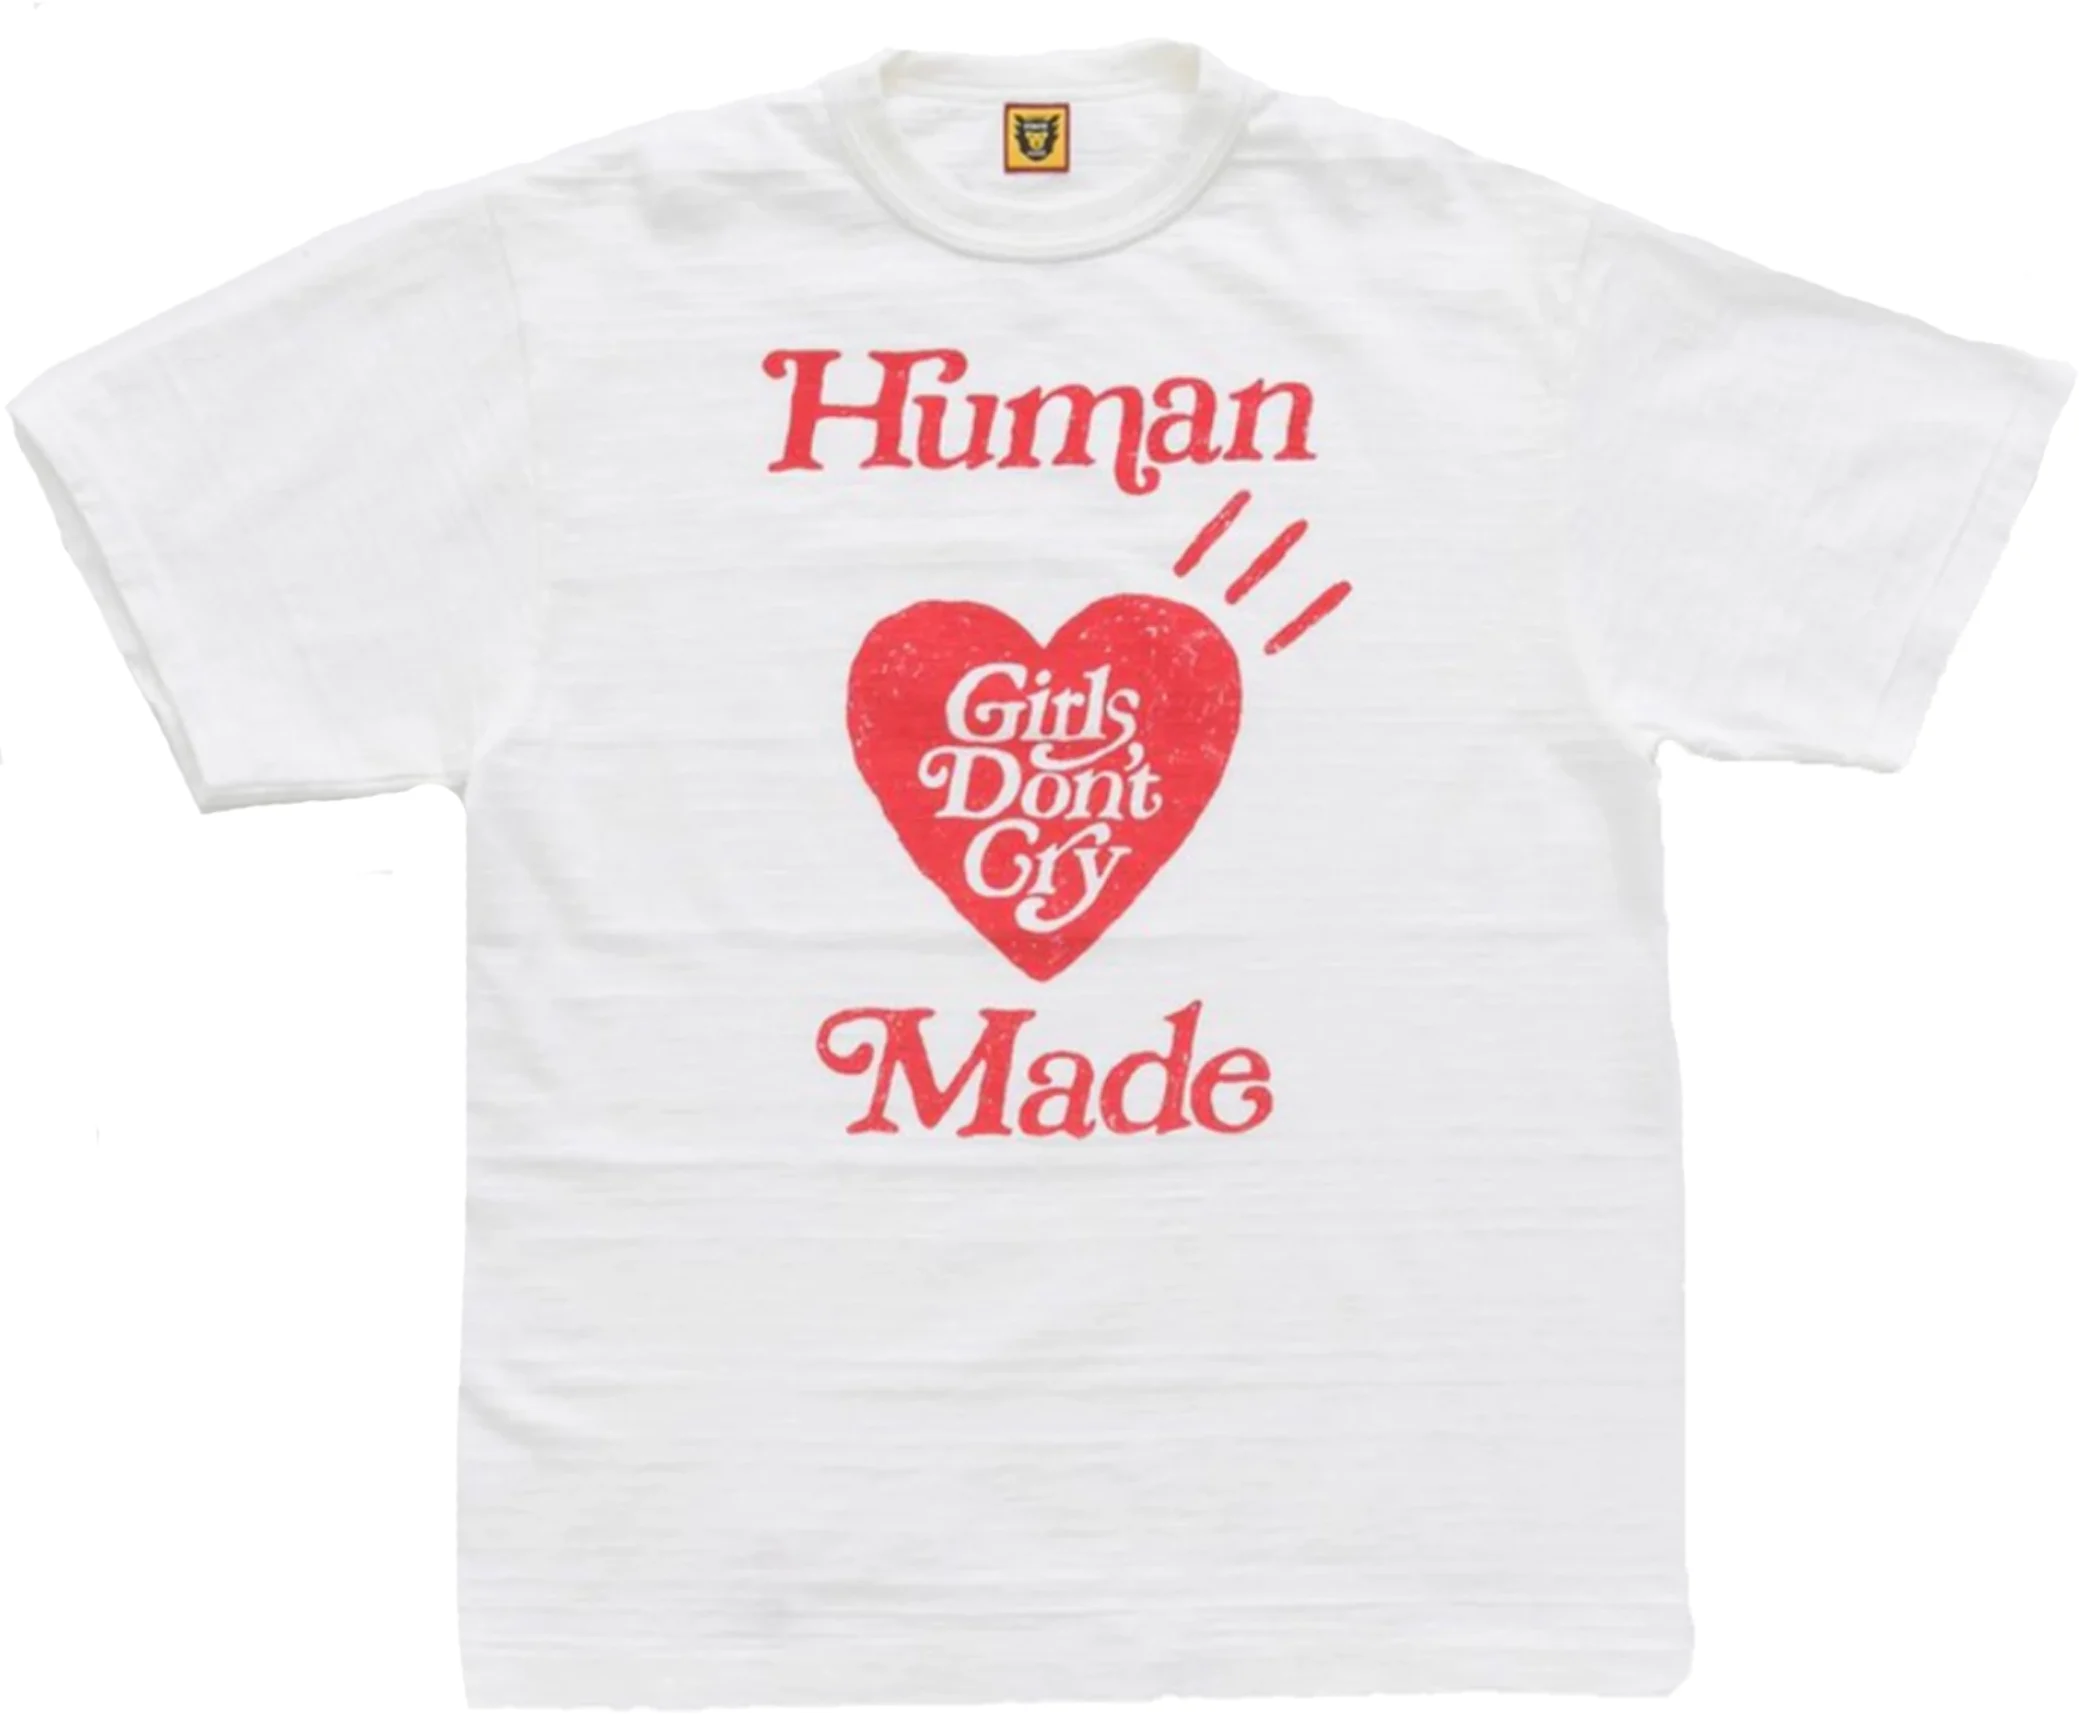 Human Made x Girls Don't Cry Tee 1 White